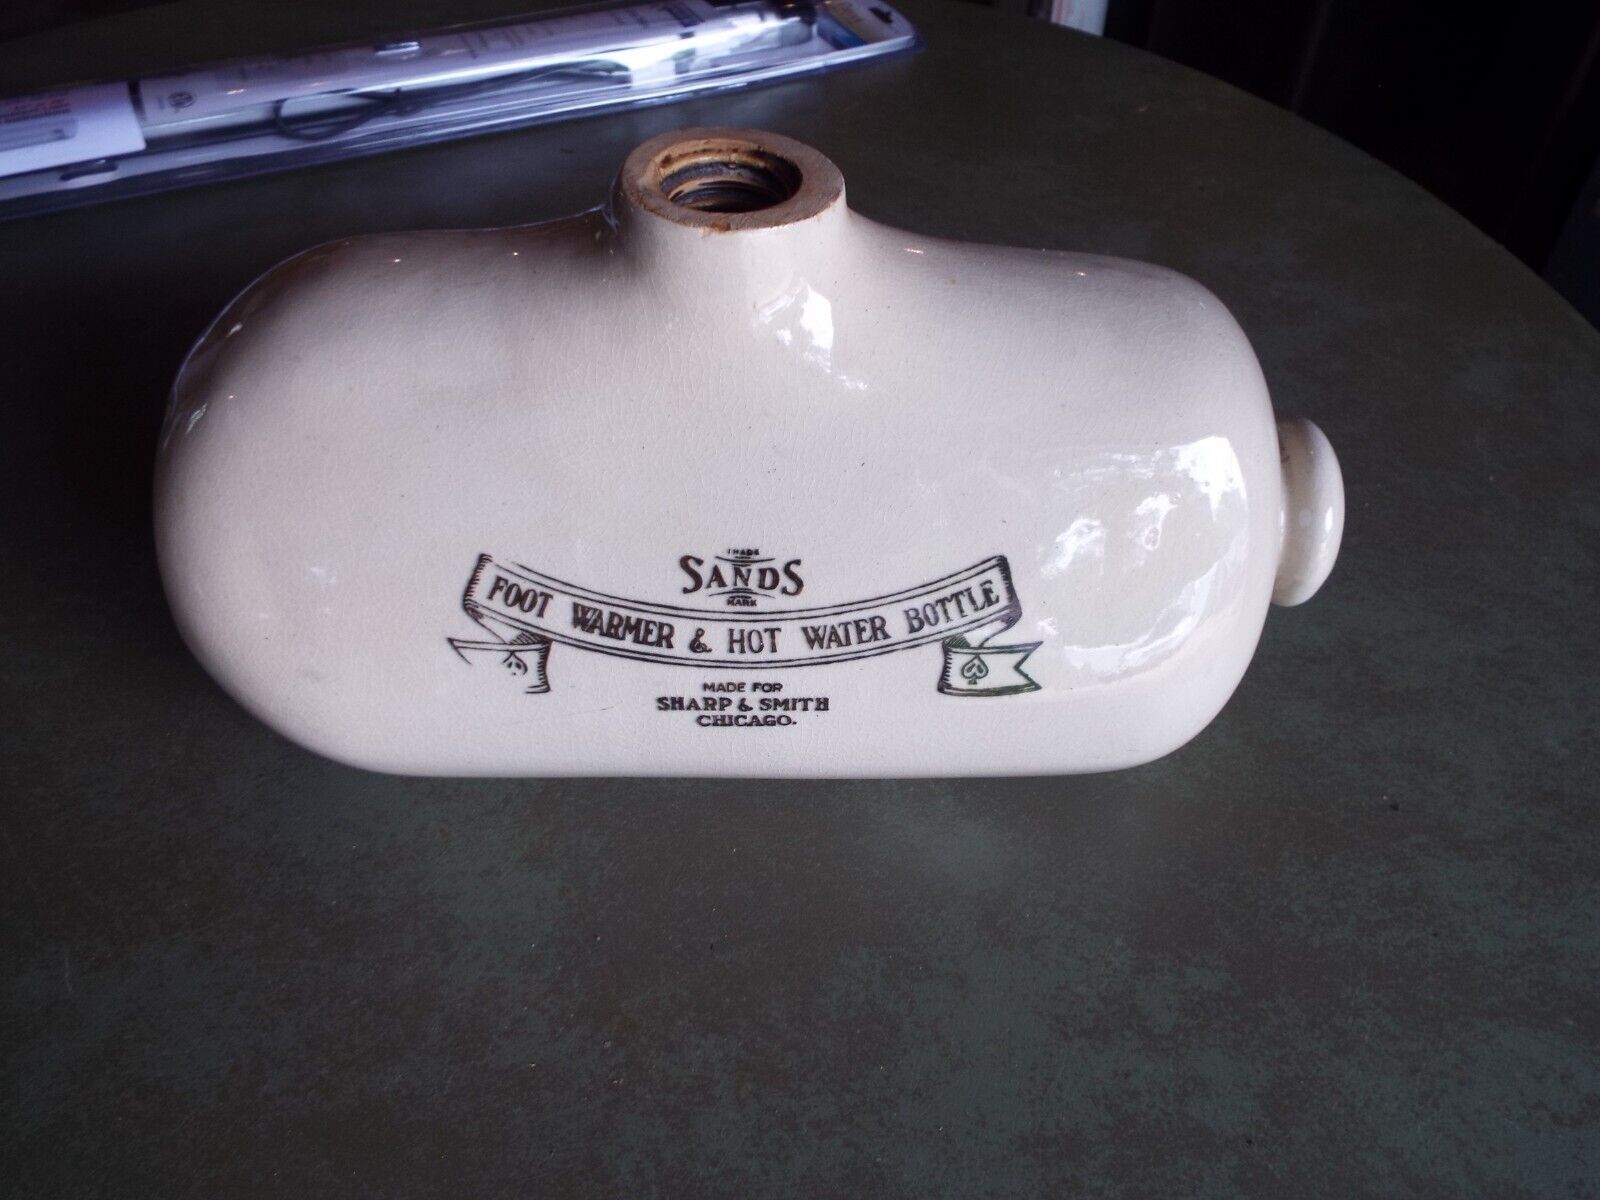 Vintage Sands Foot Warmer - Stoneware - Very Nice condition.